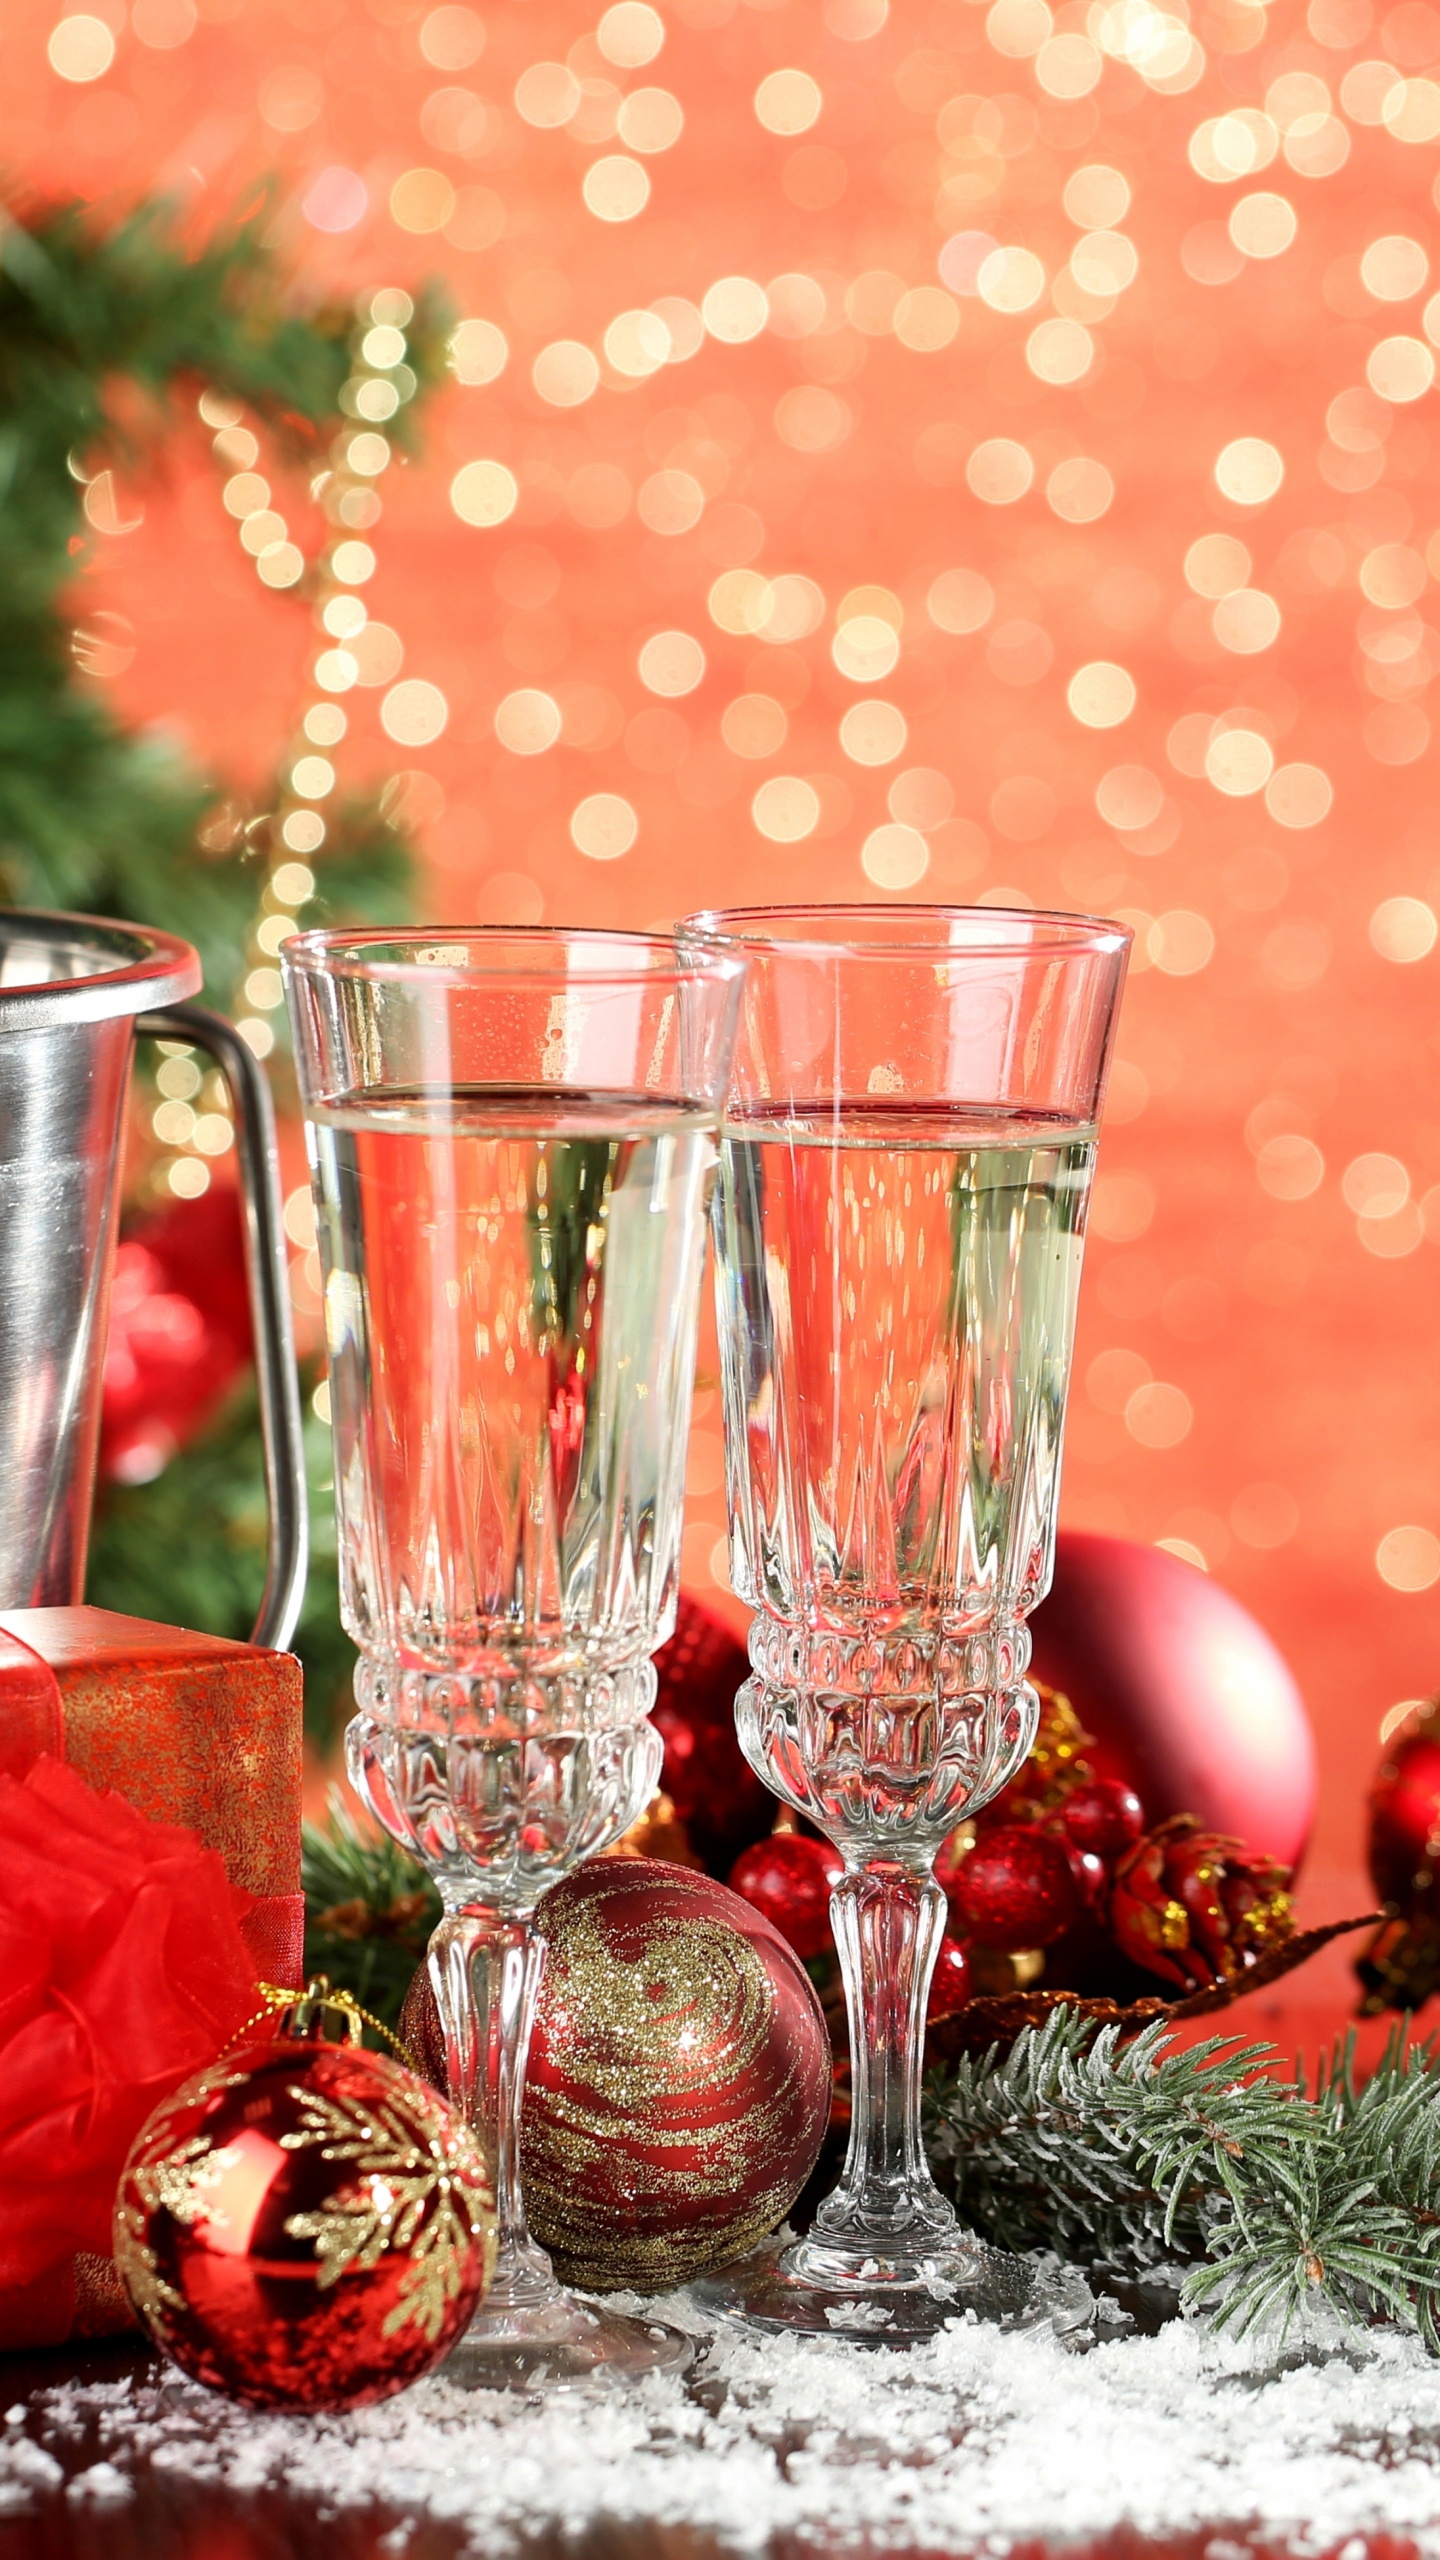 Champagne, New Year, Christmas Ornament, Christmas Decoration, Christmas. Wallpaper in 1440x2560 Resolution